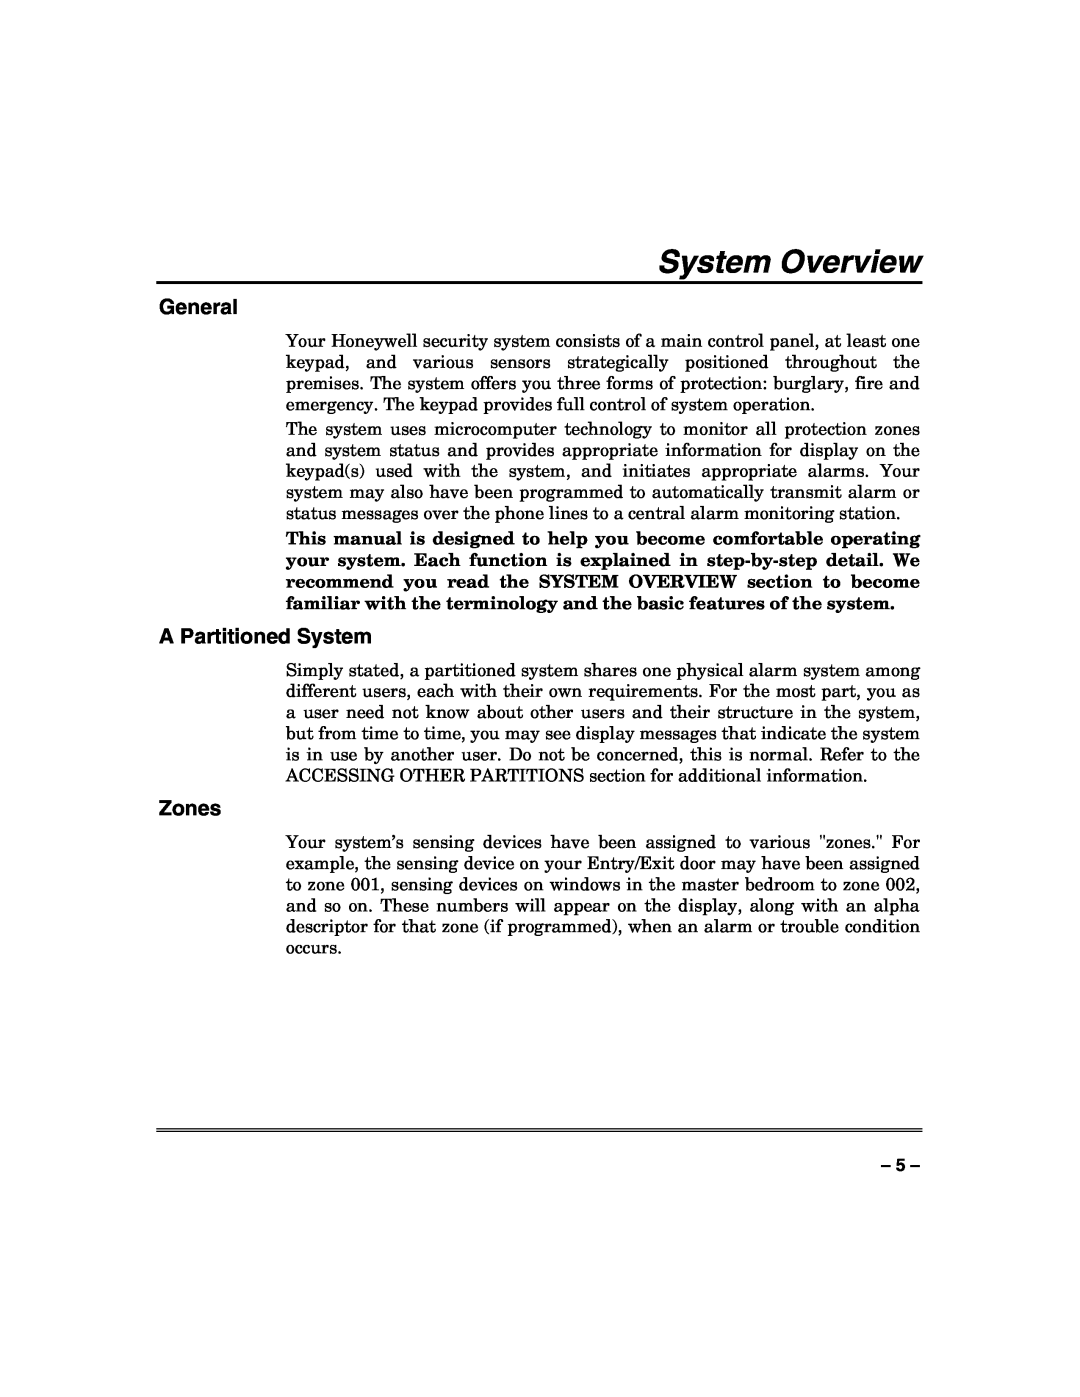 Honeywell VISTA-50PUL manual System Overview, General, A Partitioned System, Zones 